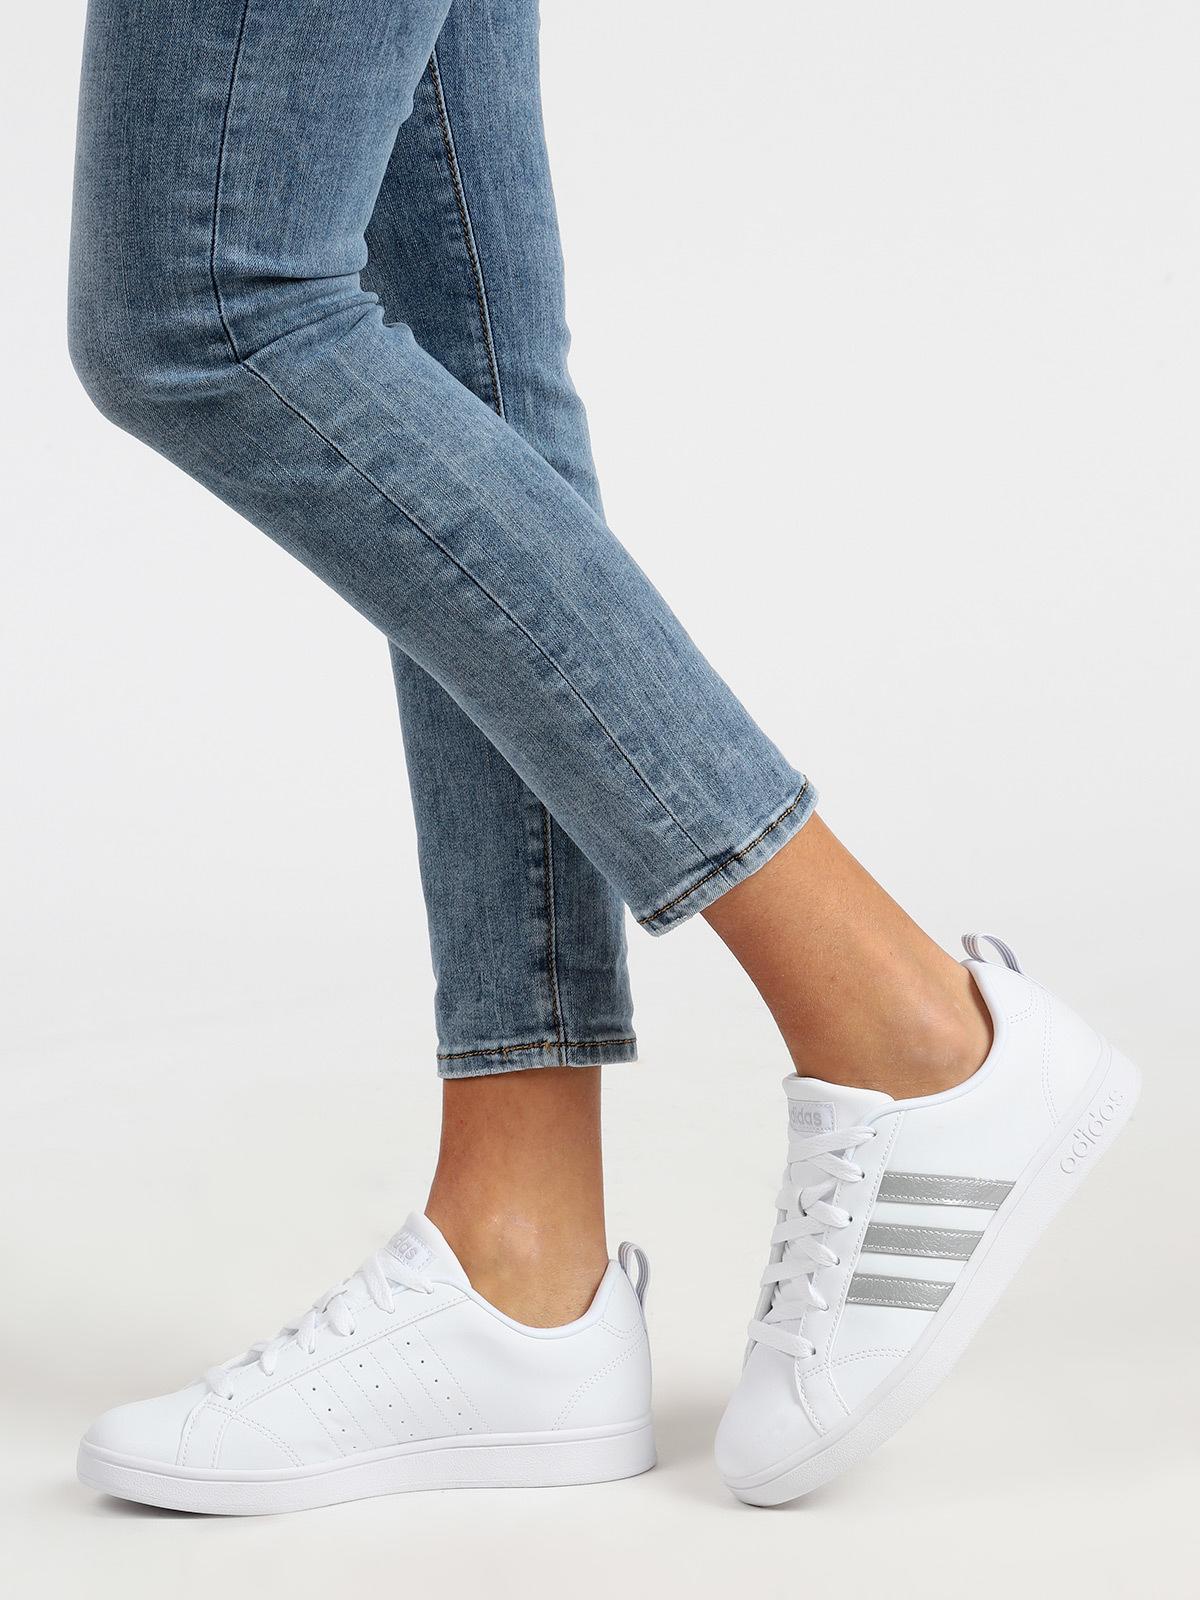 adidas donna scarpe sneakers bianche